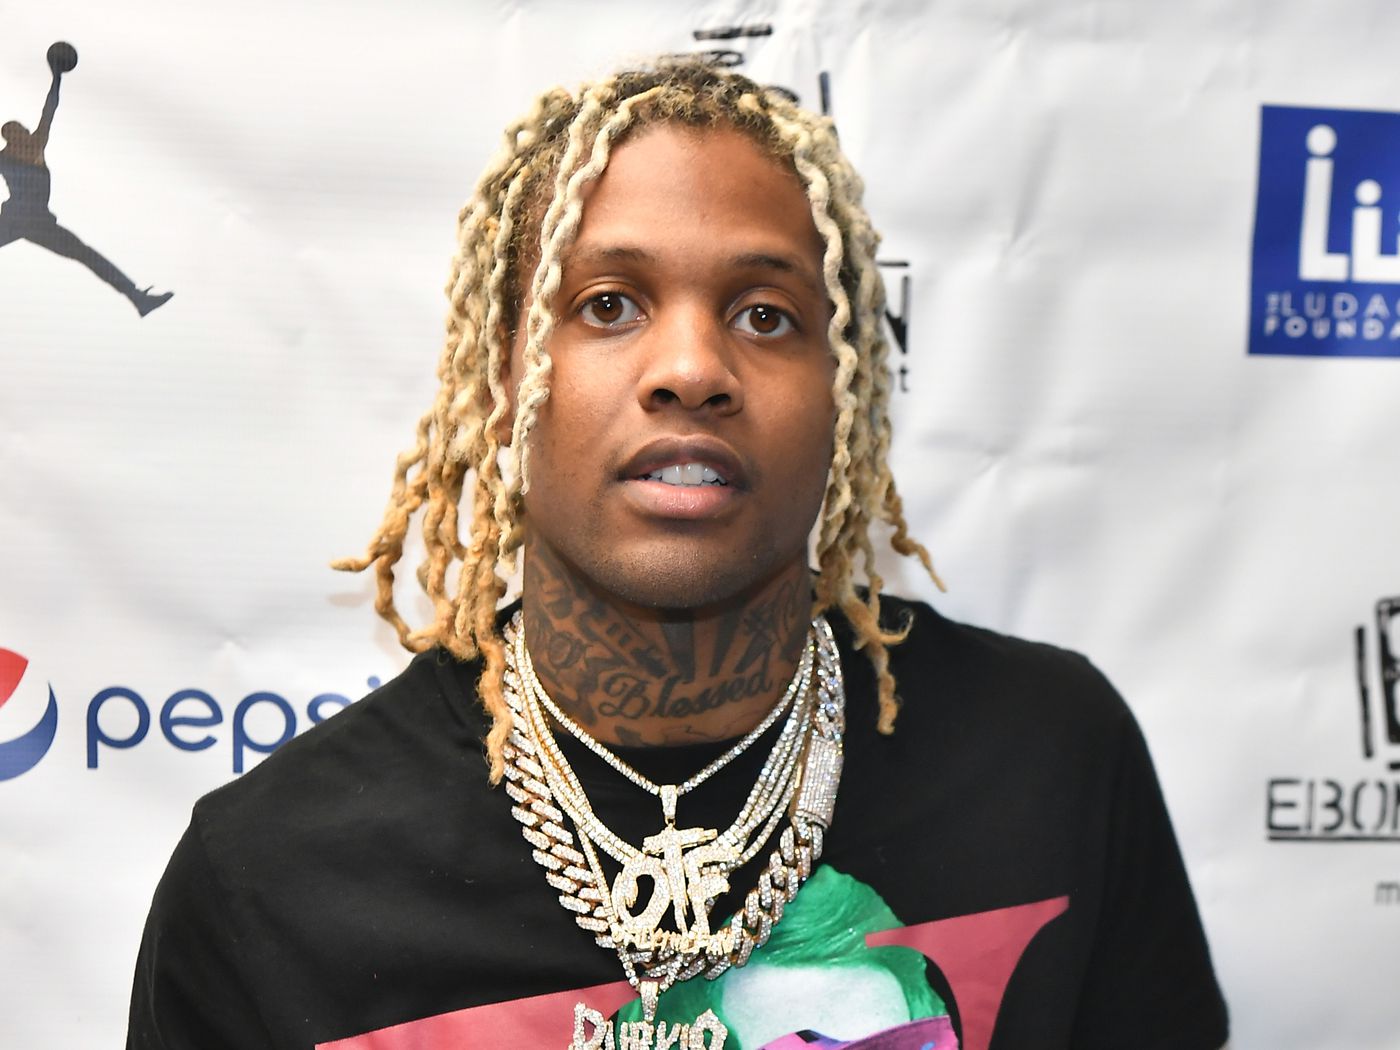 Listen to Lil Durk’s new single: Piss me off